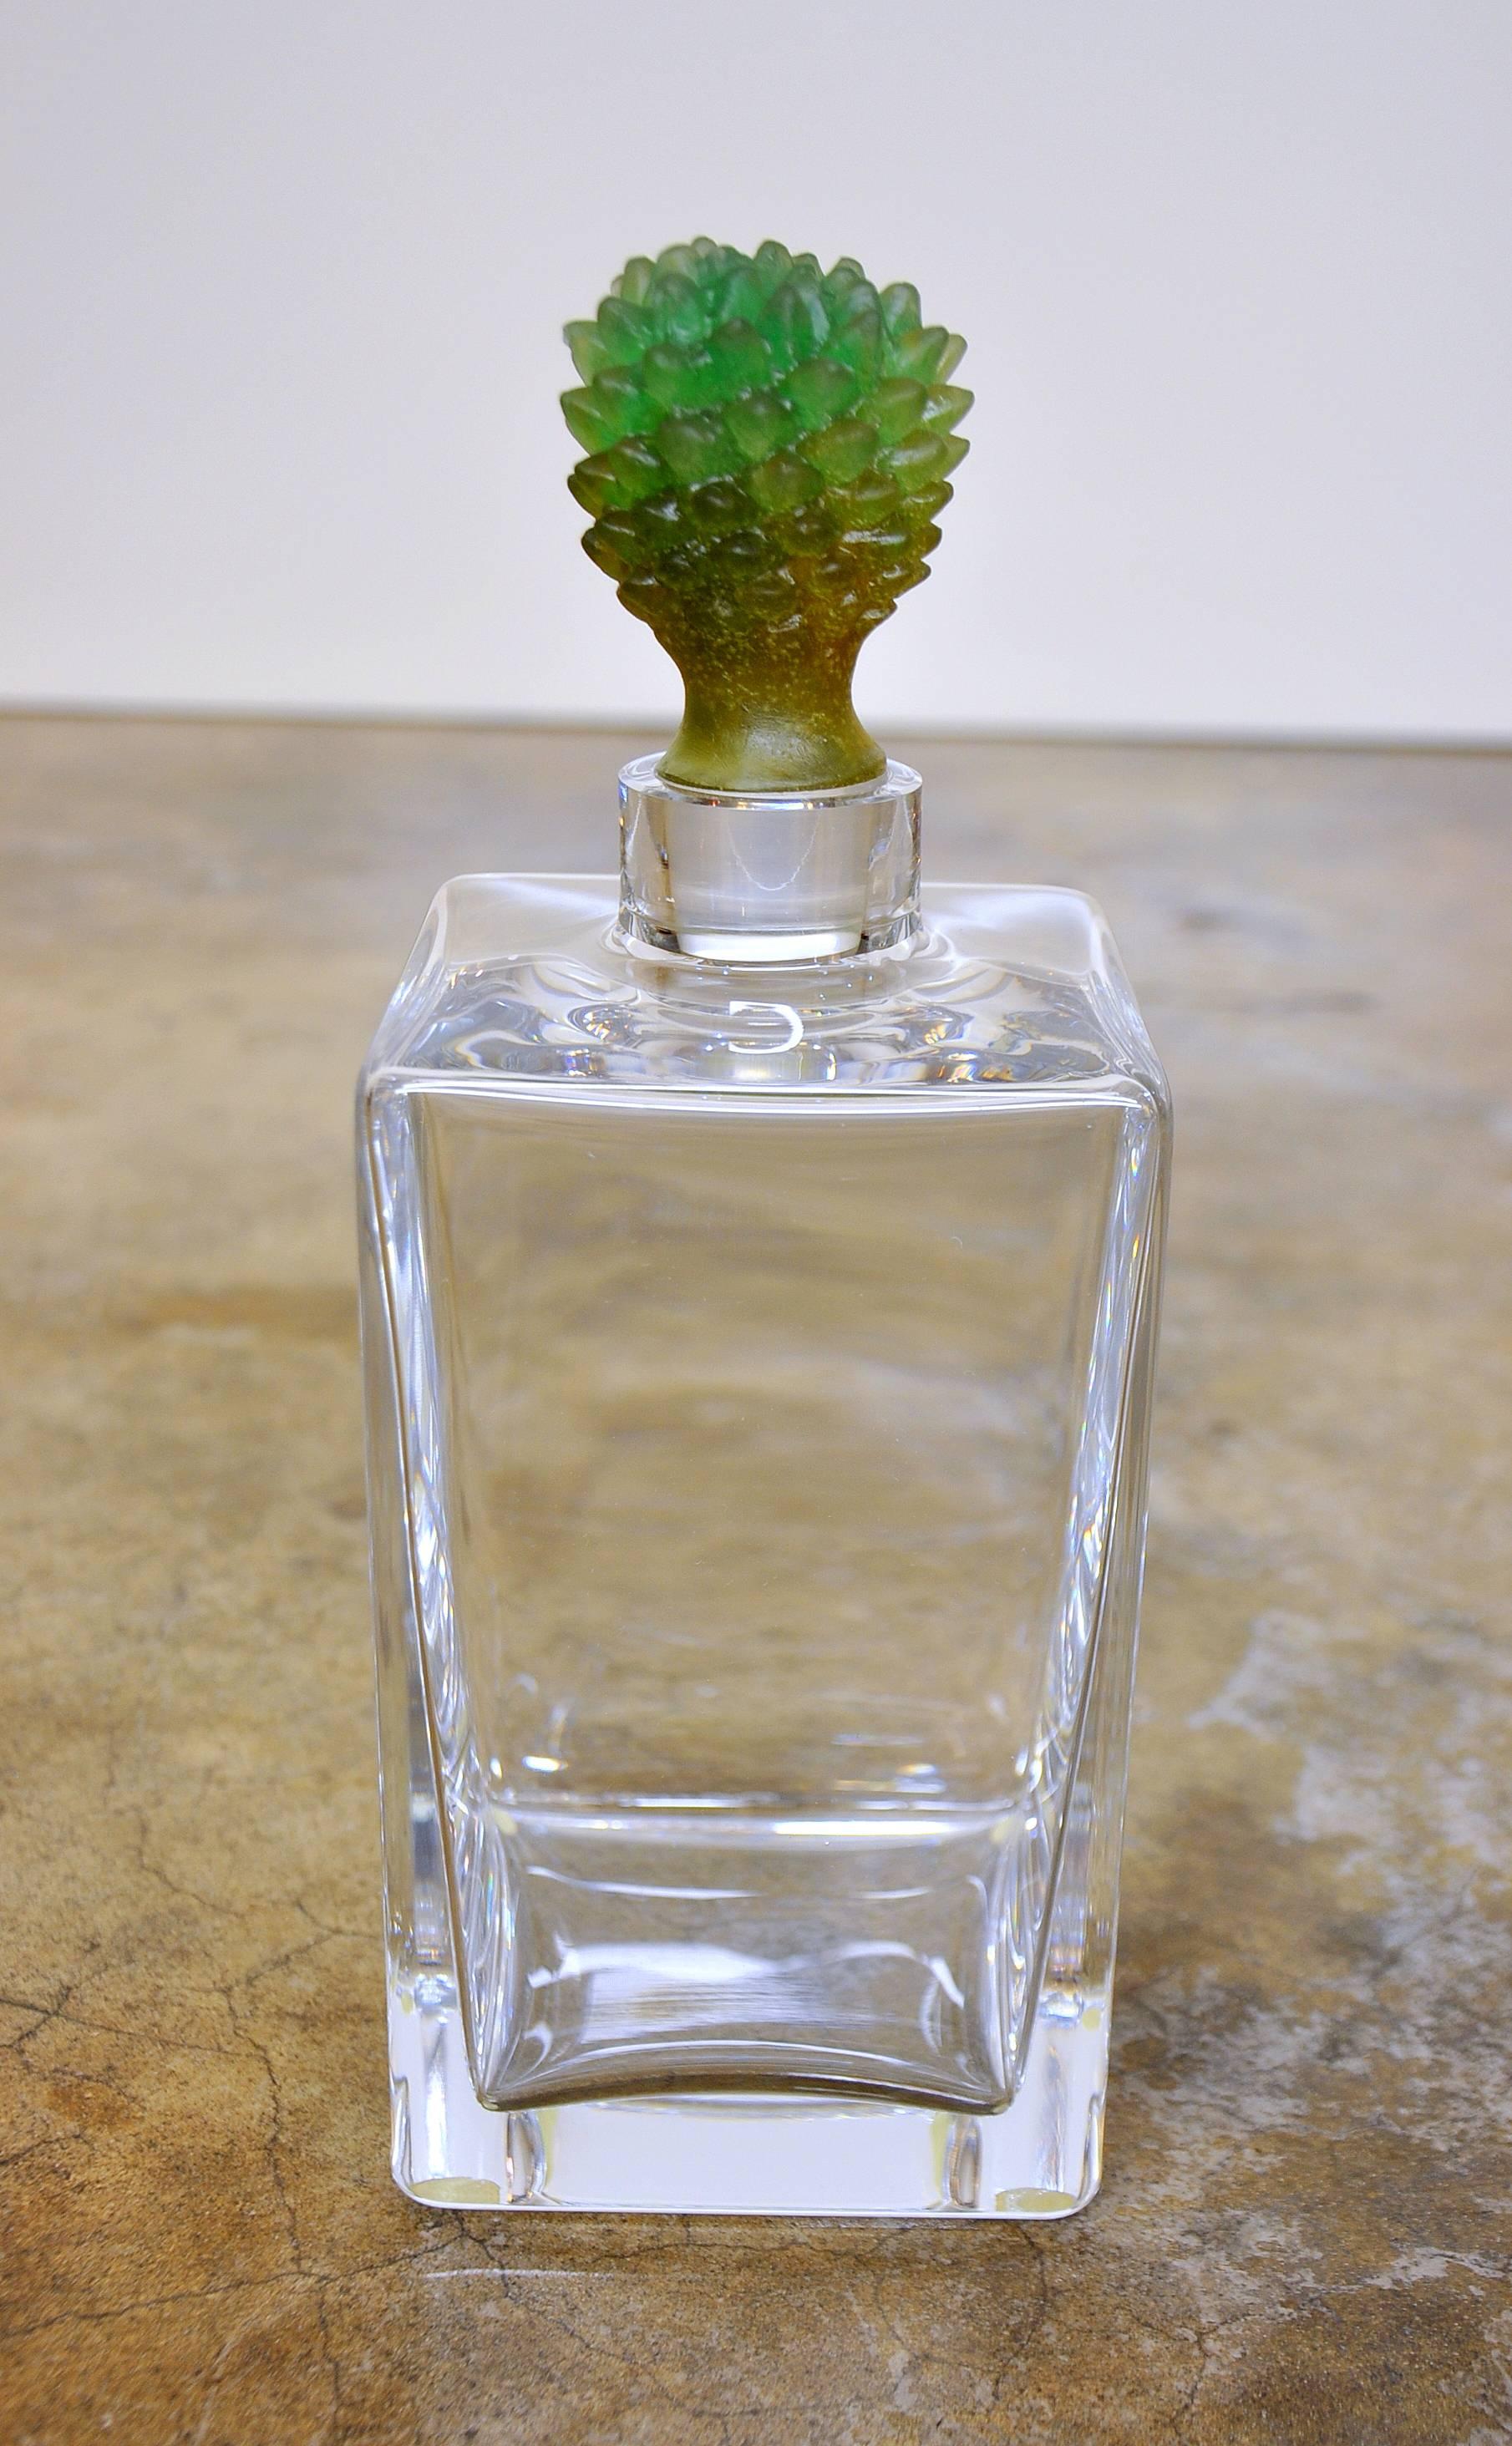 Rare, unique and highly collectible Daum crystal decanter with a pâte de verre cactus shaped stopper. The designer Joseph Hilton McConnico began his collaboration with Daum France in 1987, and was the first American whose work became part of the